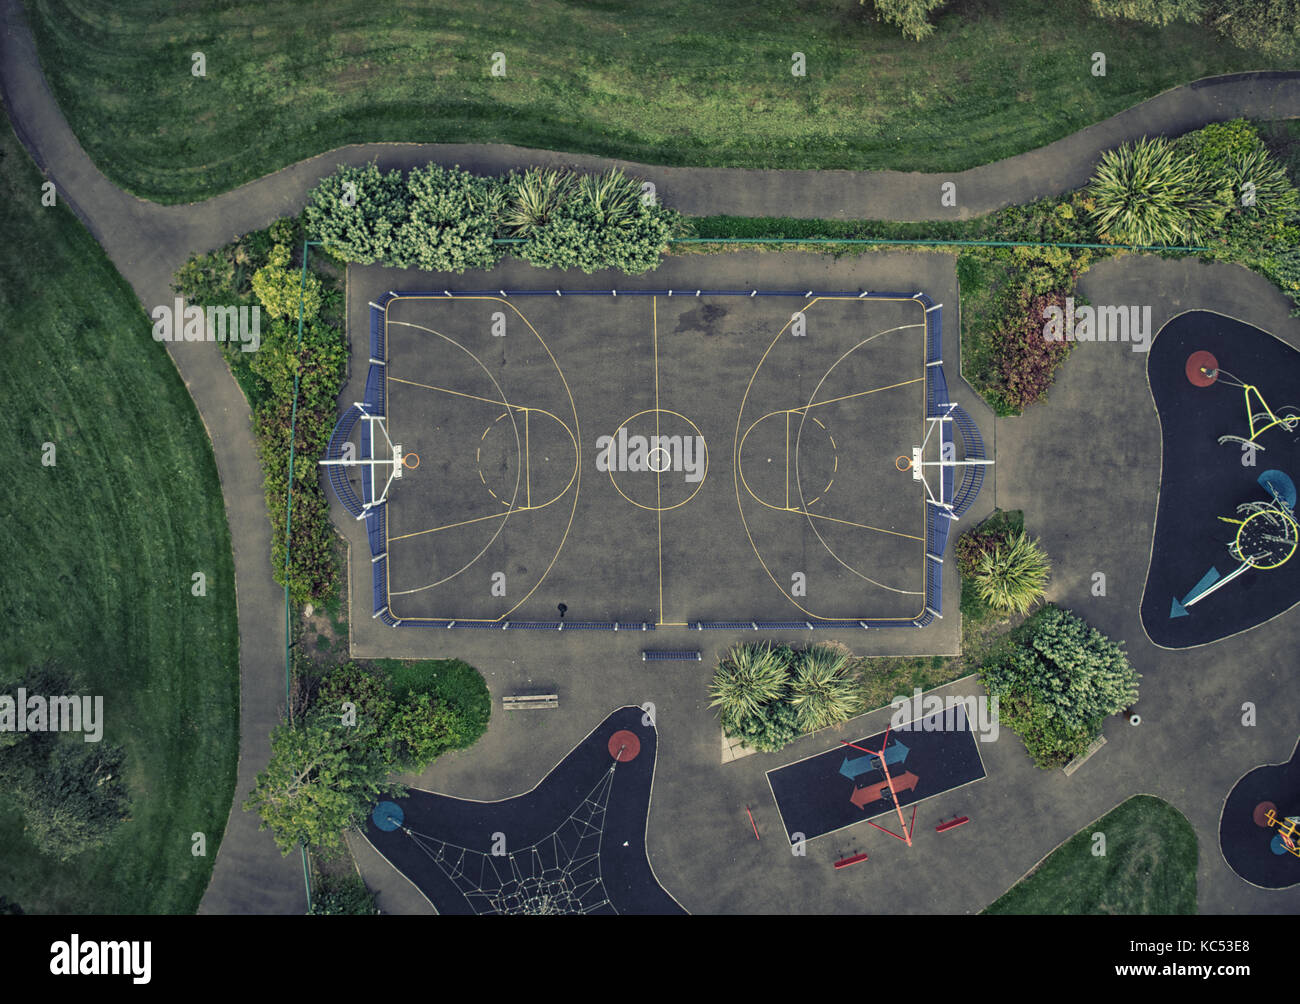 Aerial view of a Basketball Court from directly above Stock Photo